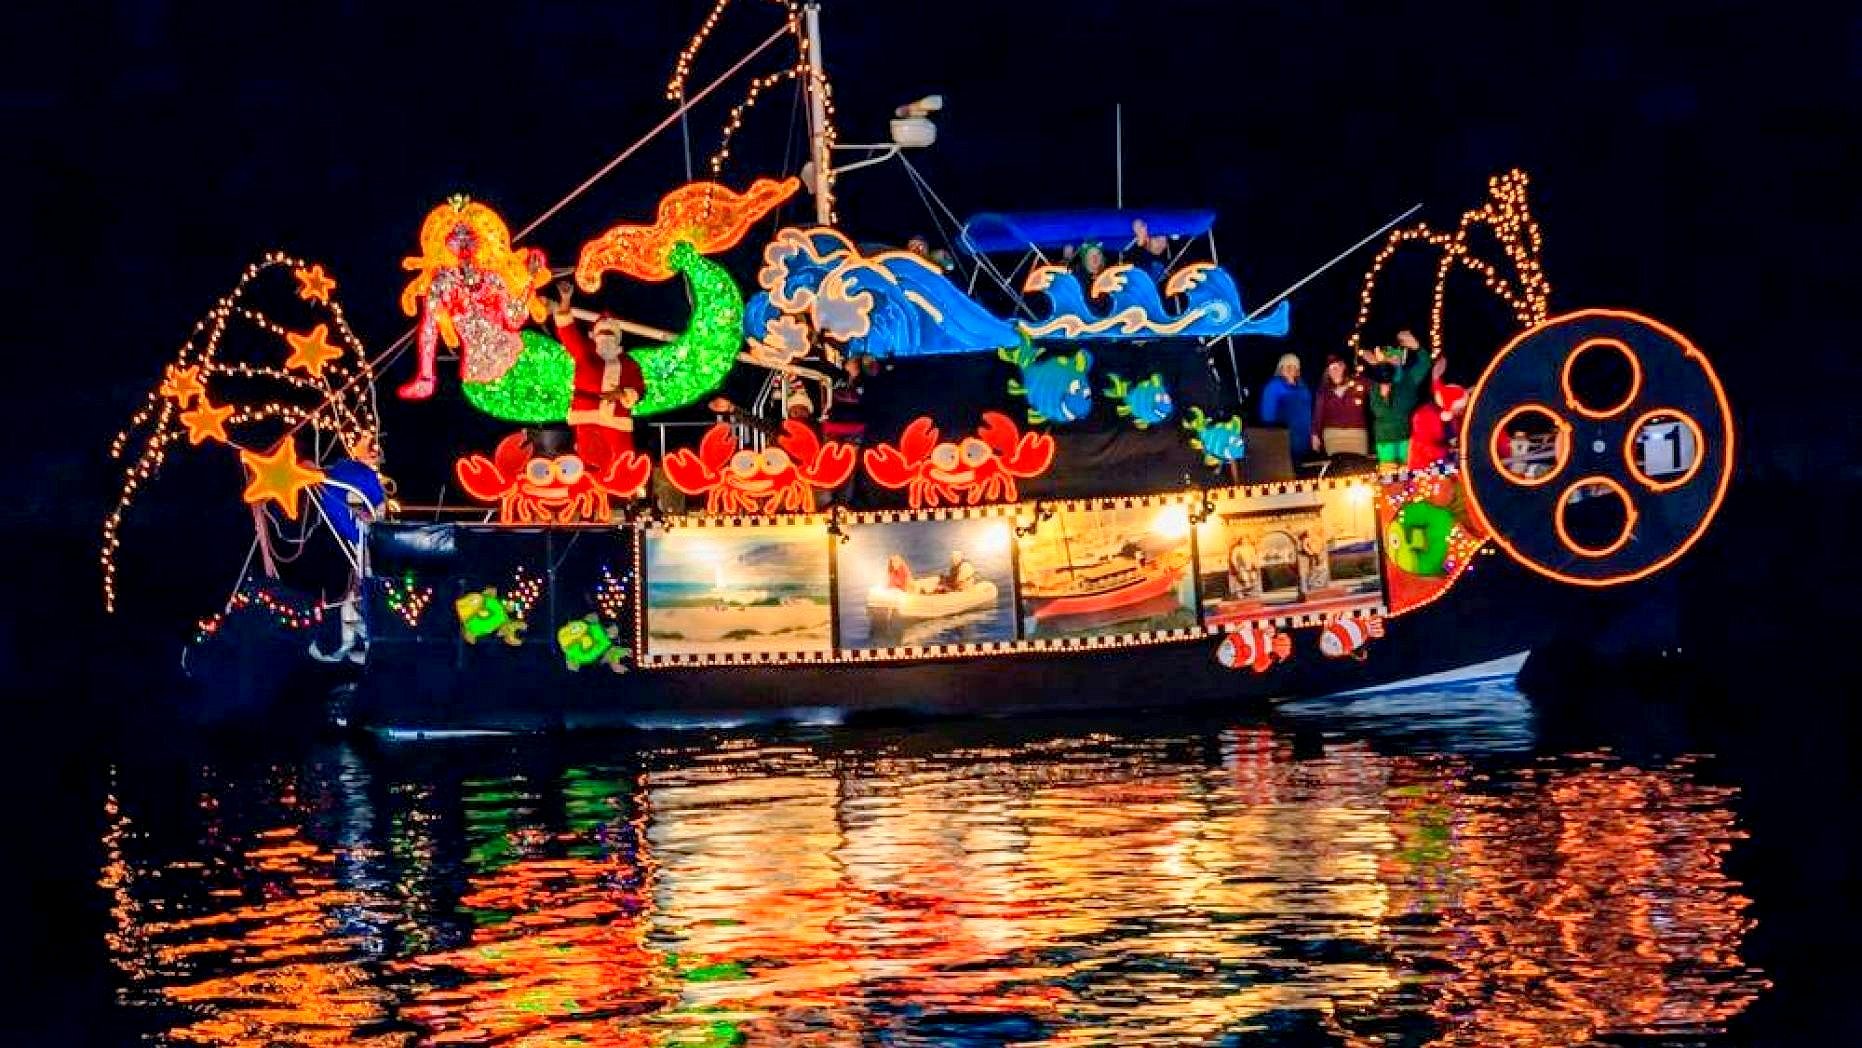 Ventura Harbour Annual Parade of Boats, Parade of Lights, Ventura, California. Google image from https://www.foxnews.com/travel/6-festive-boat-parades-to-light-up-your-holidays